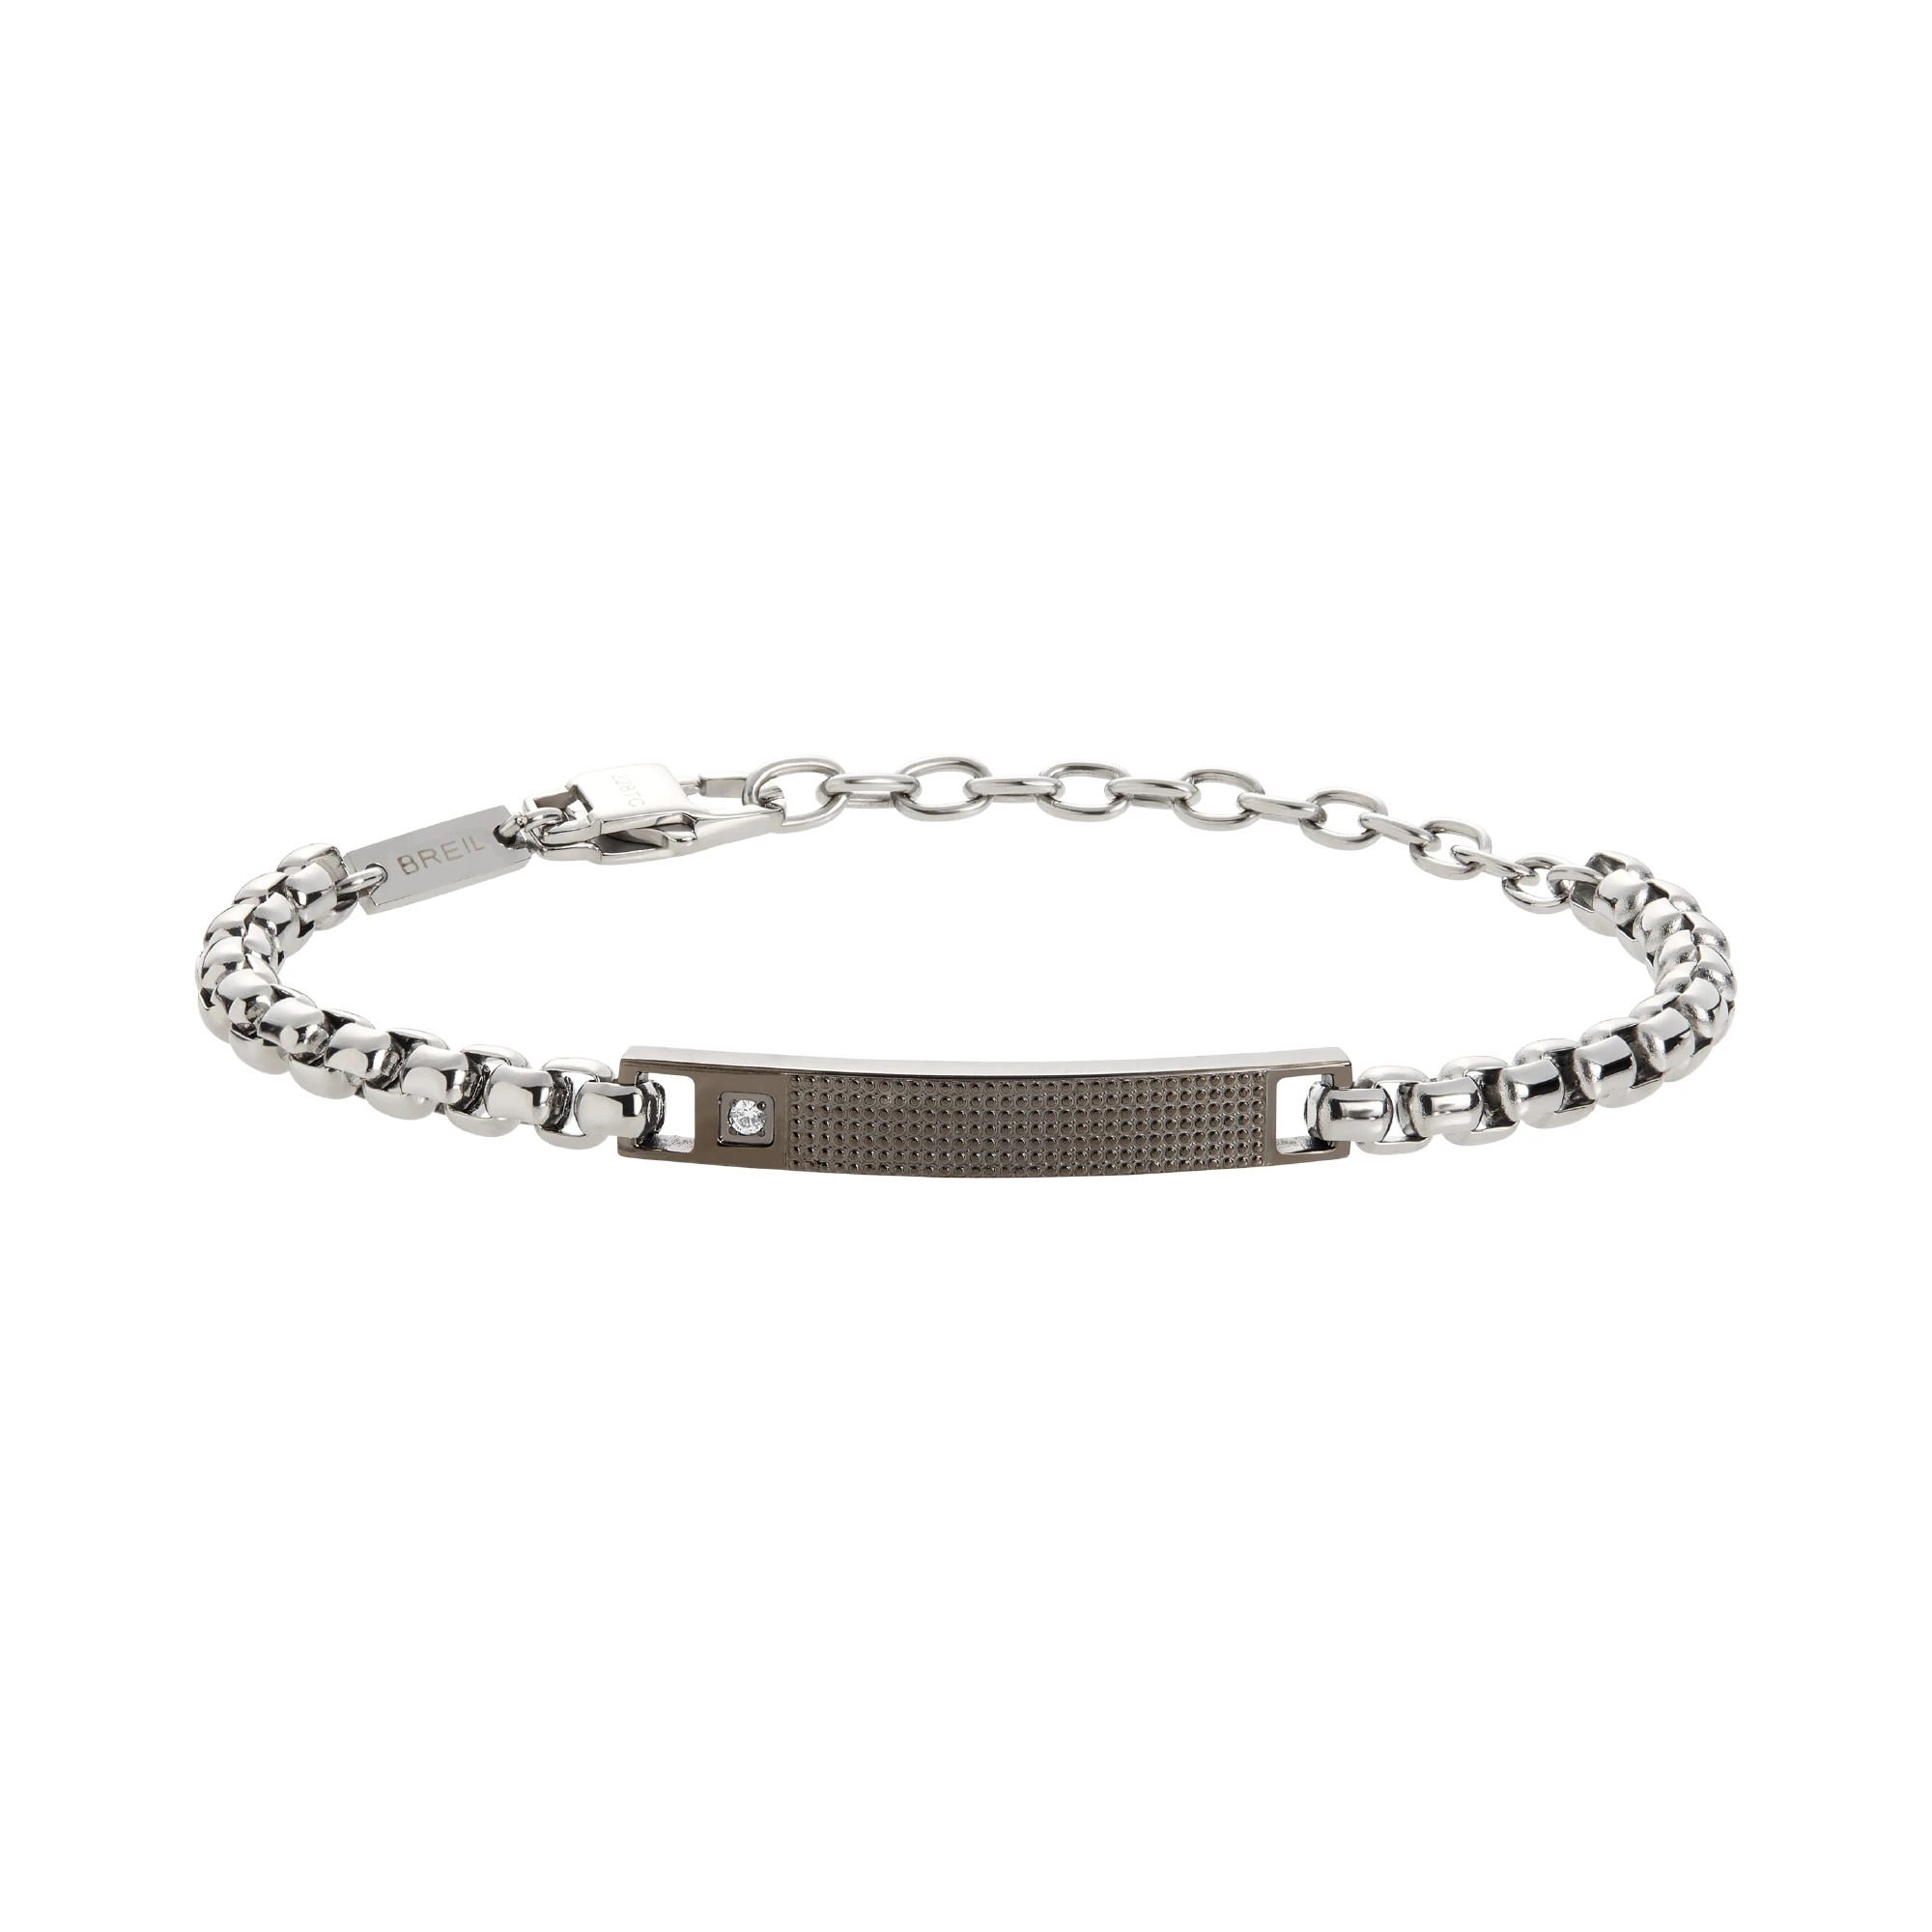 TAG AND CROSS - TWO-COLOR STEEL BRACELET WITH CUBIC ZIRCONIA - 1 - TJ3226 | Breil